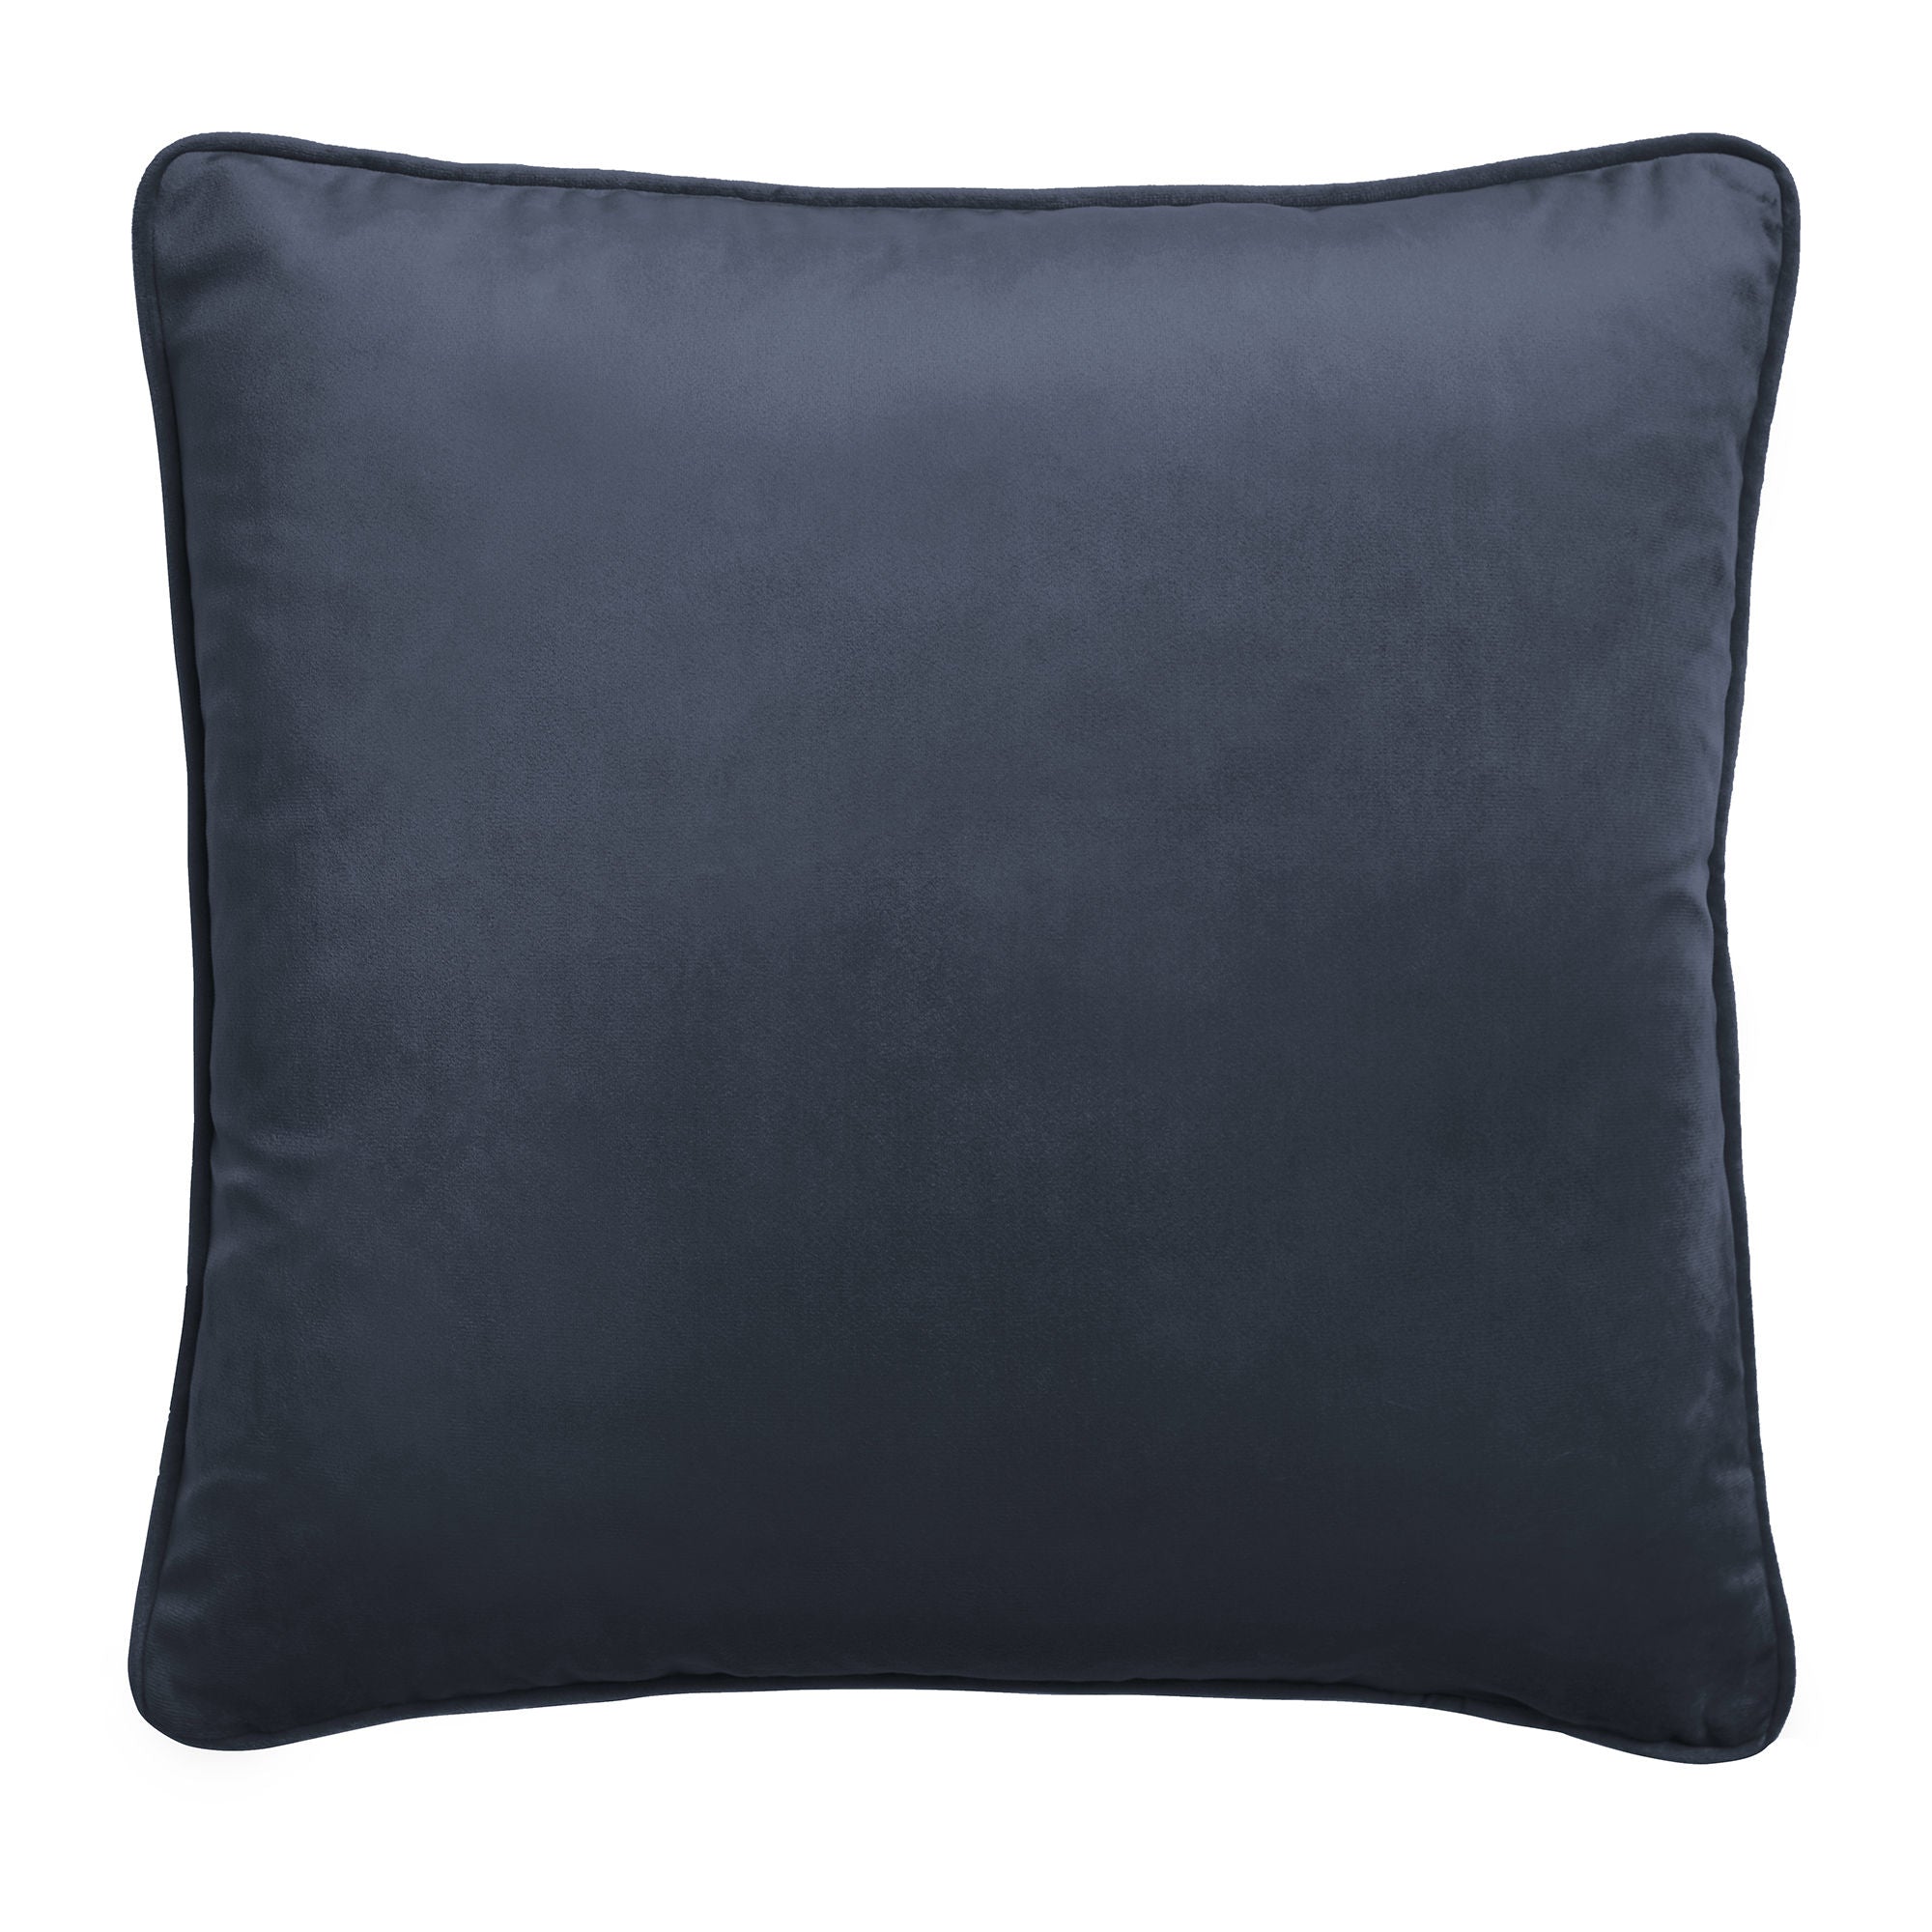 Montrose Cushion by Laurence Llewelyn-Bowen in Navy 43 x 43cm - Cushion - Laurence Llewelyn-Bowen